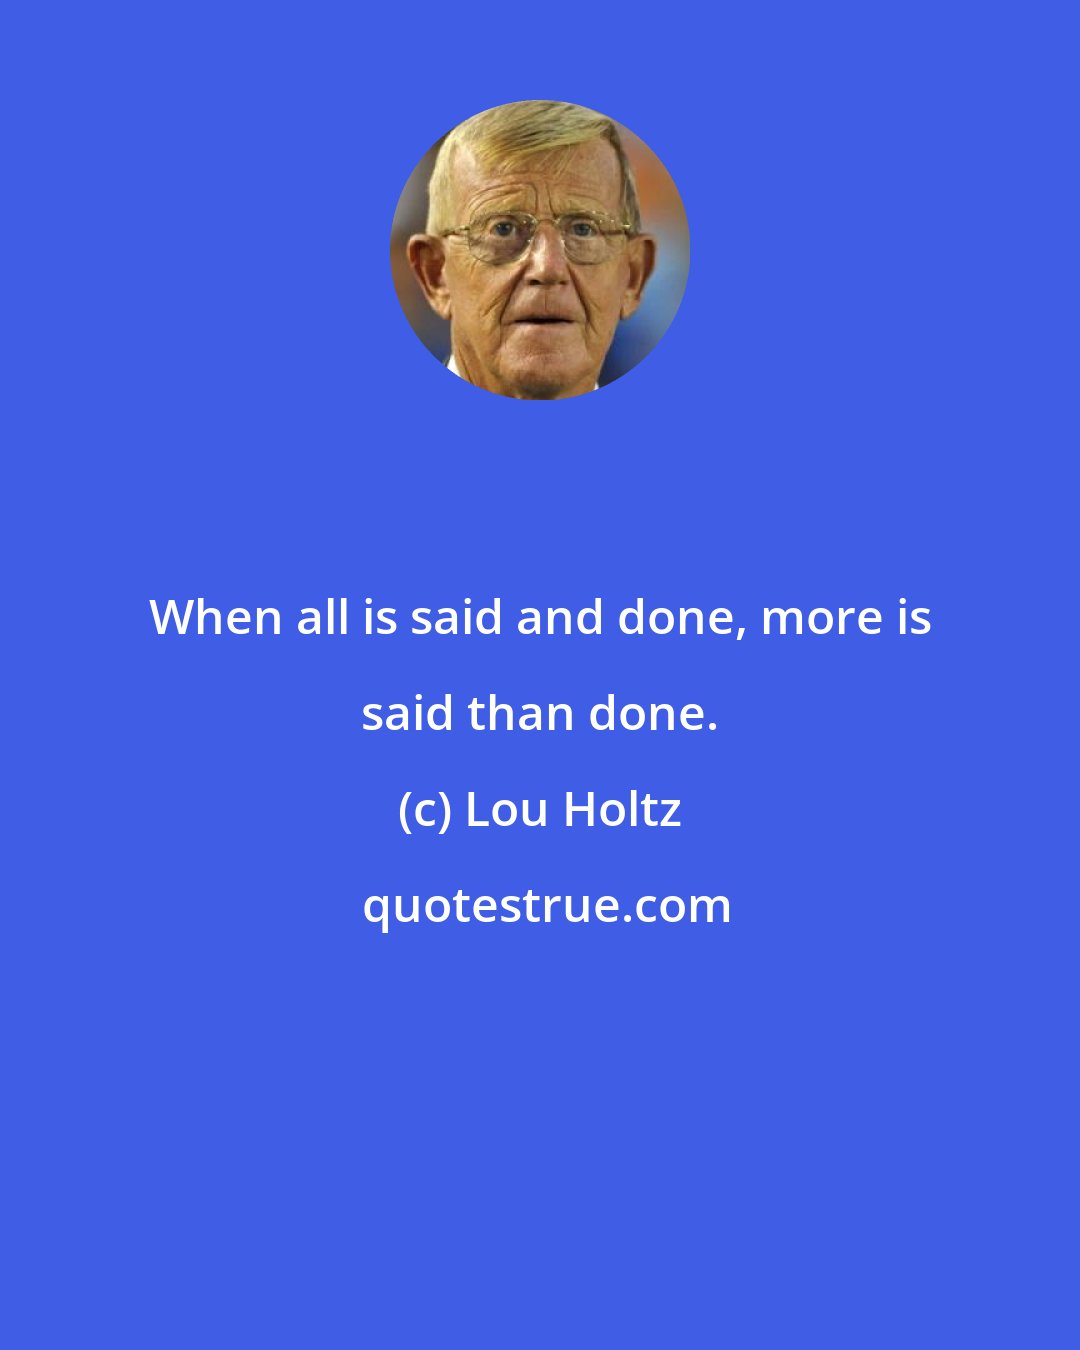 Lou Holtz: When all is said and done, more is said than done.